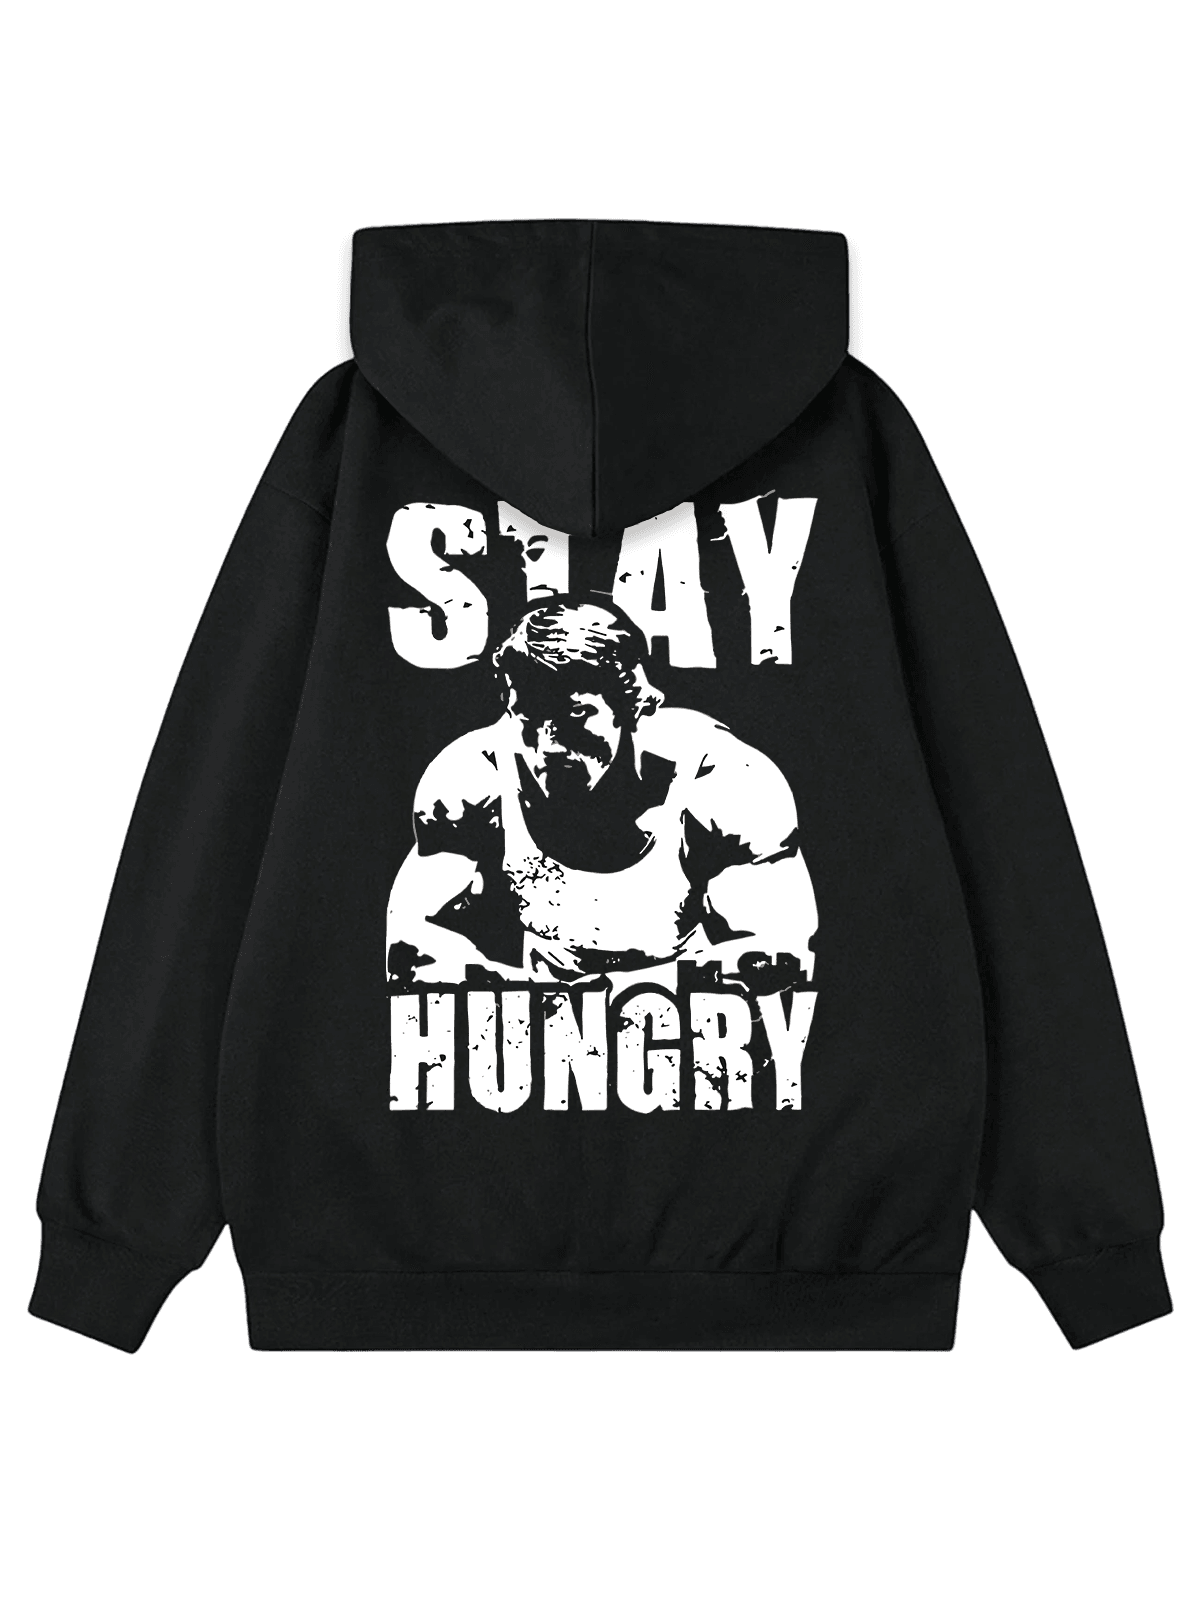 "STAY HUNGRY" Oversize Hoodie